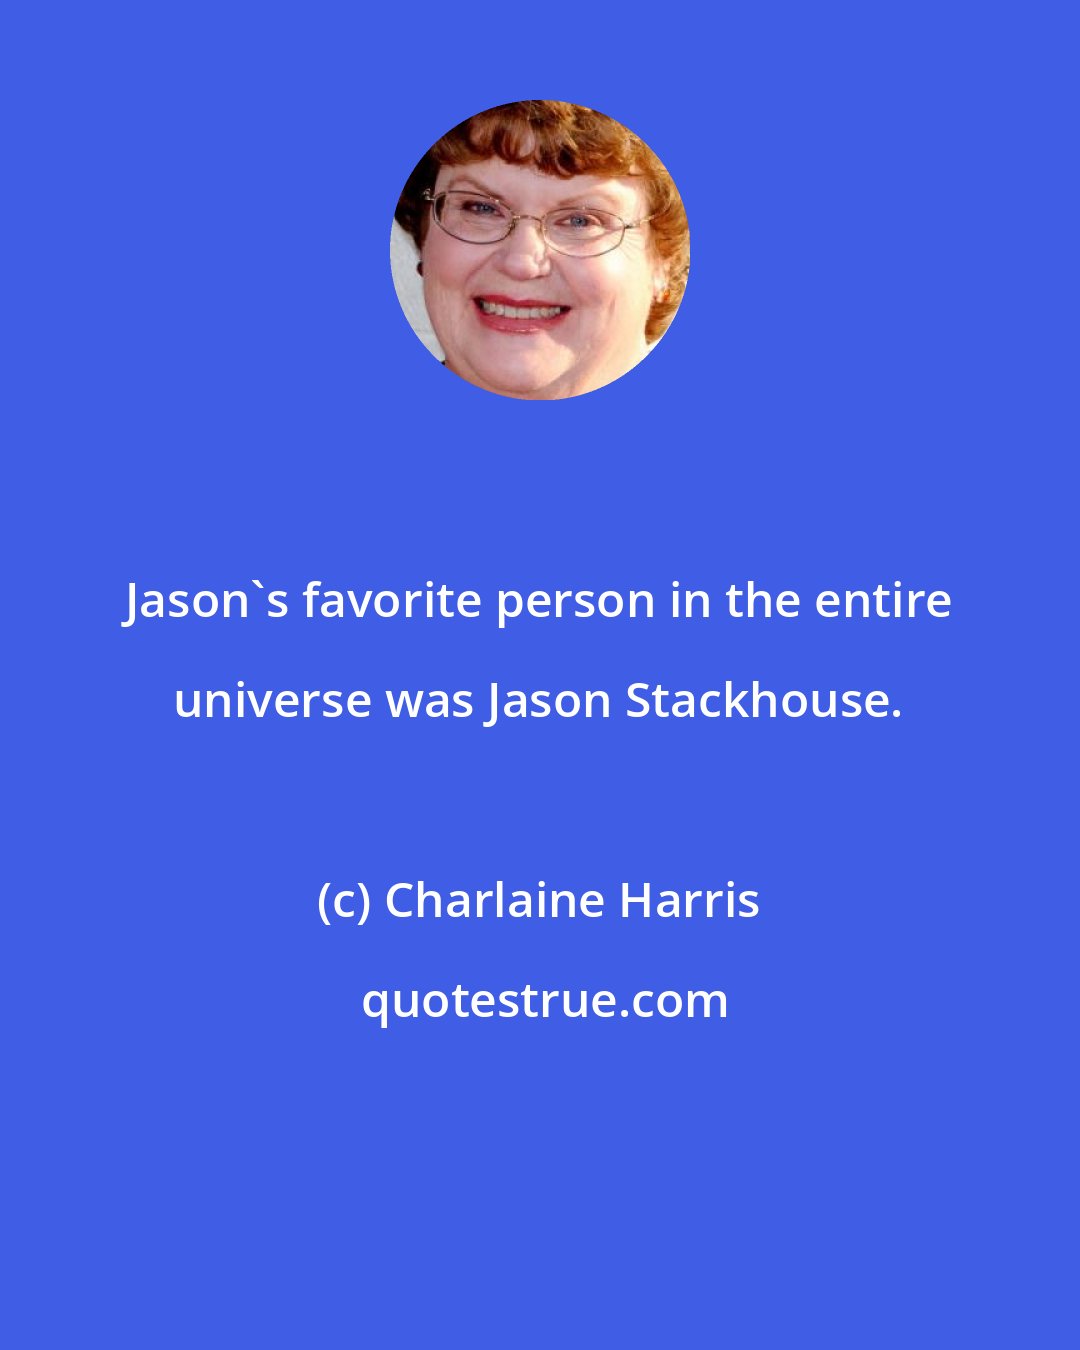 Charlaine Harris: Jason's favorite person in the entire universe was Jason Stackhouse.